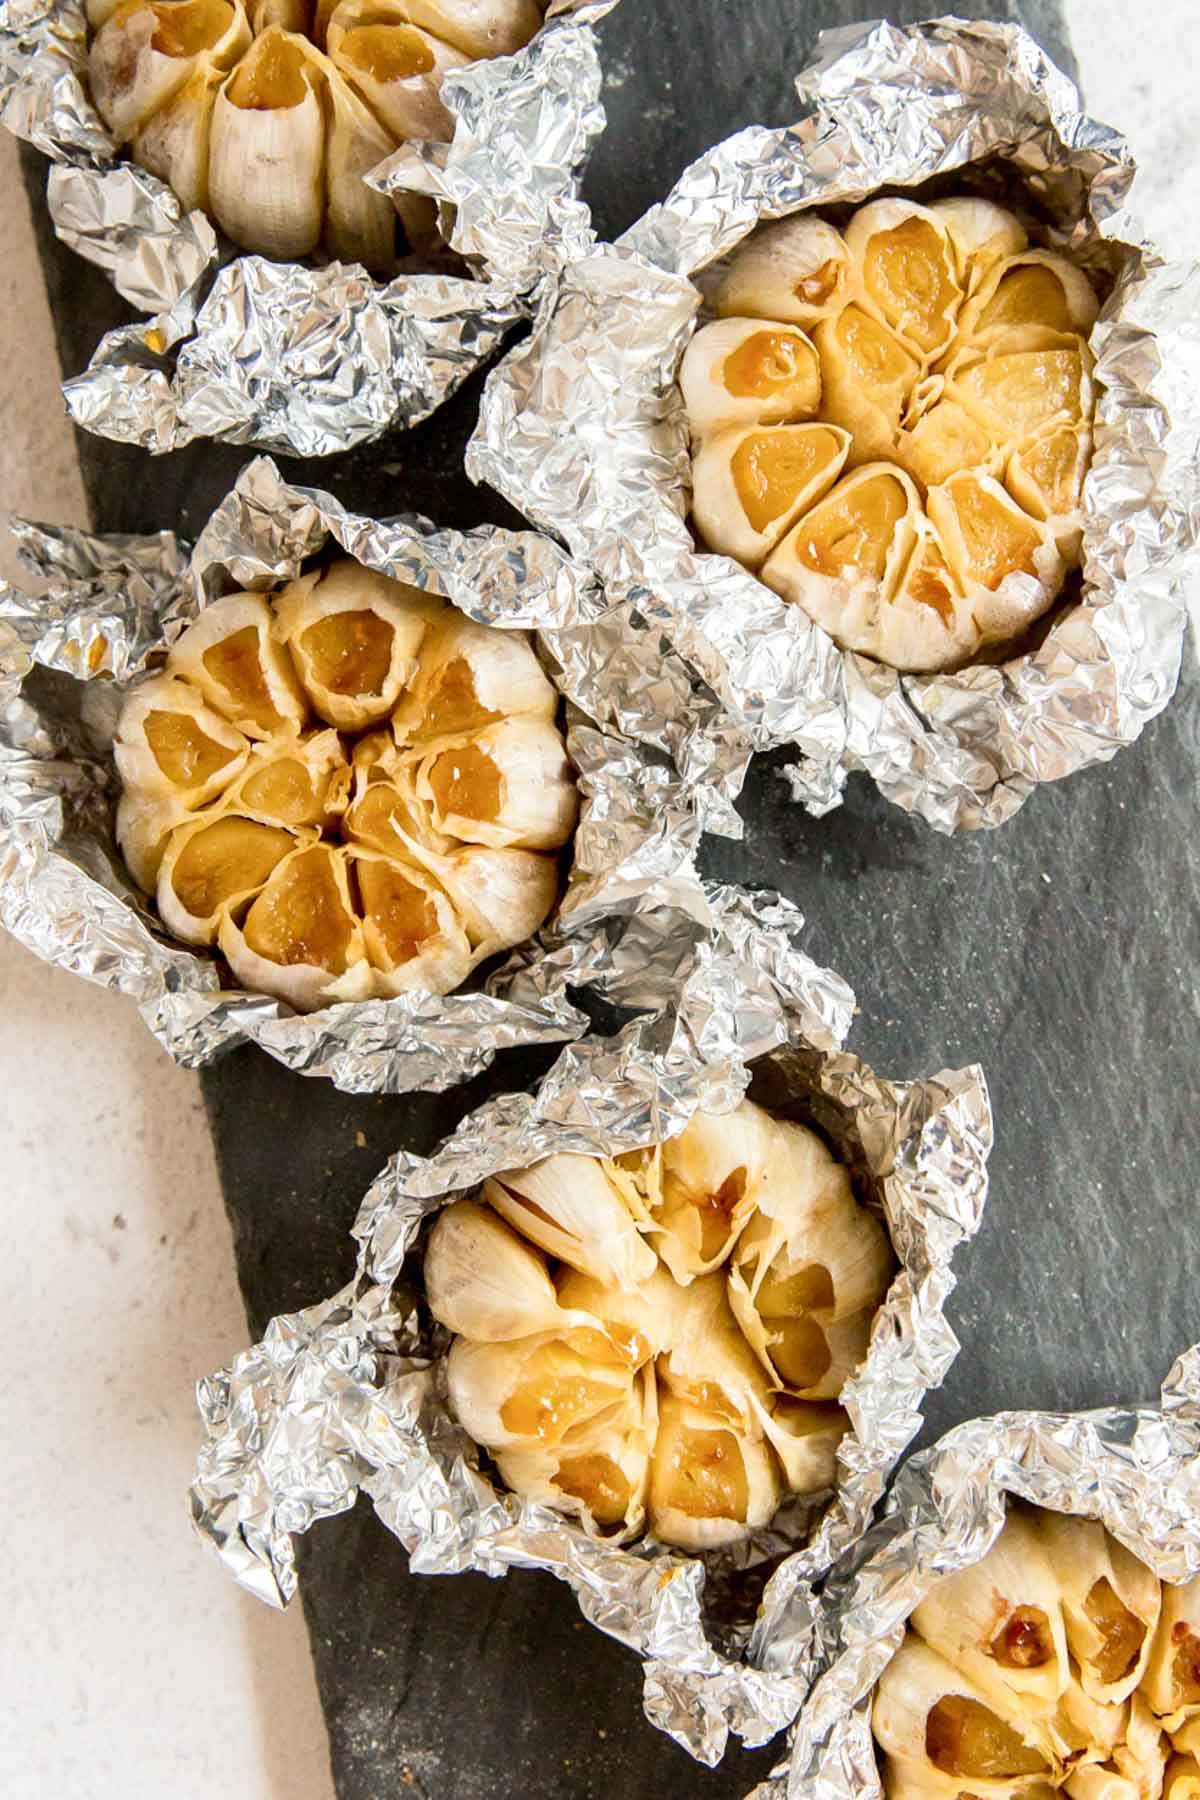 Heads of roasted garlic sitting in foil.